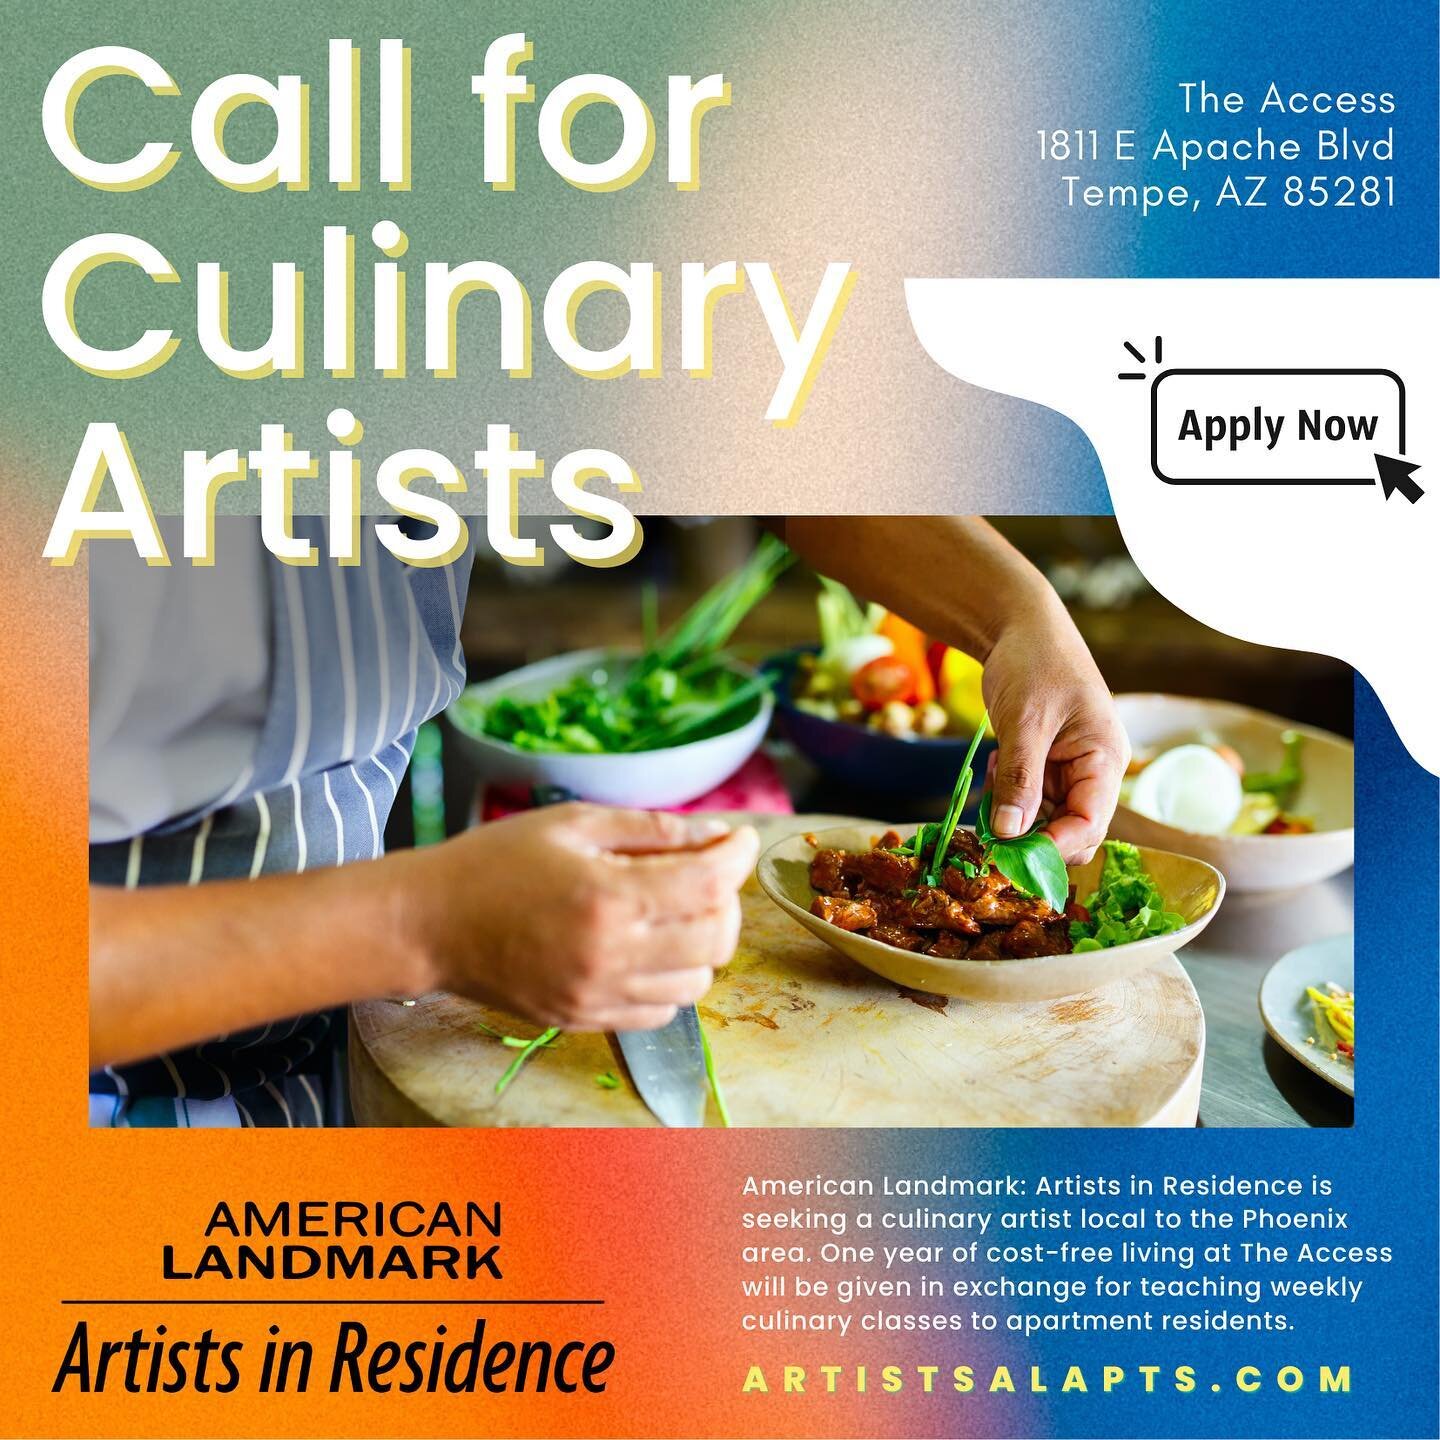 We are currently accepting applications for a Culinary Artist position located at The Access - 1811 E Apache Blvd, Tempe, Arizona 85281. Culinary artists local to the Tempe/Phoenix area who are interested in expanding their practice in a community-fo